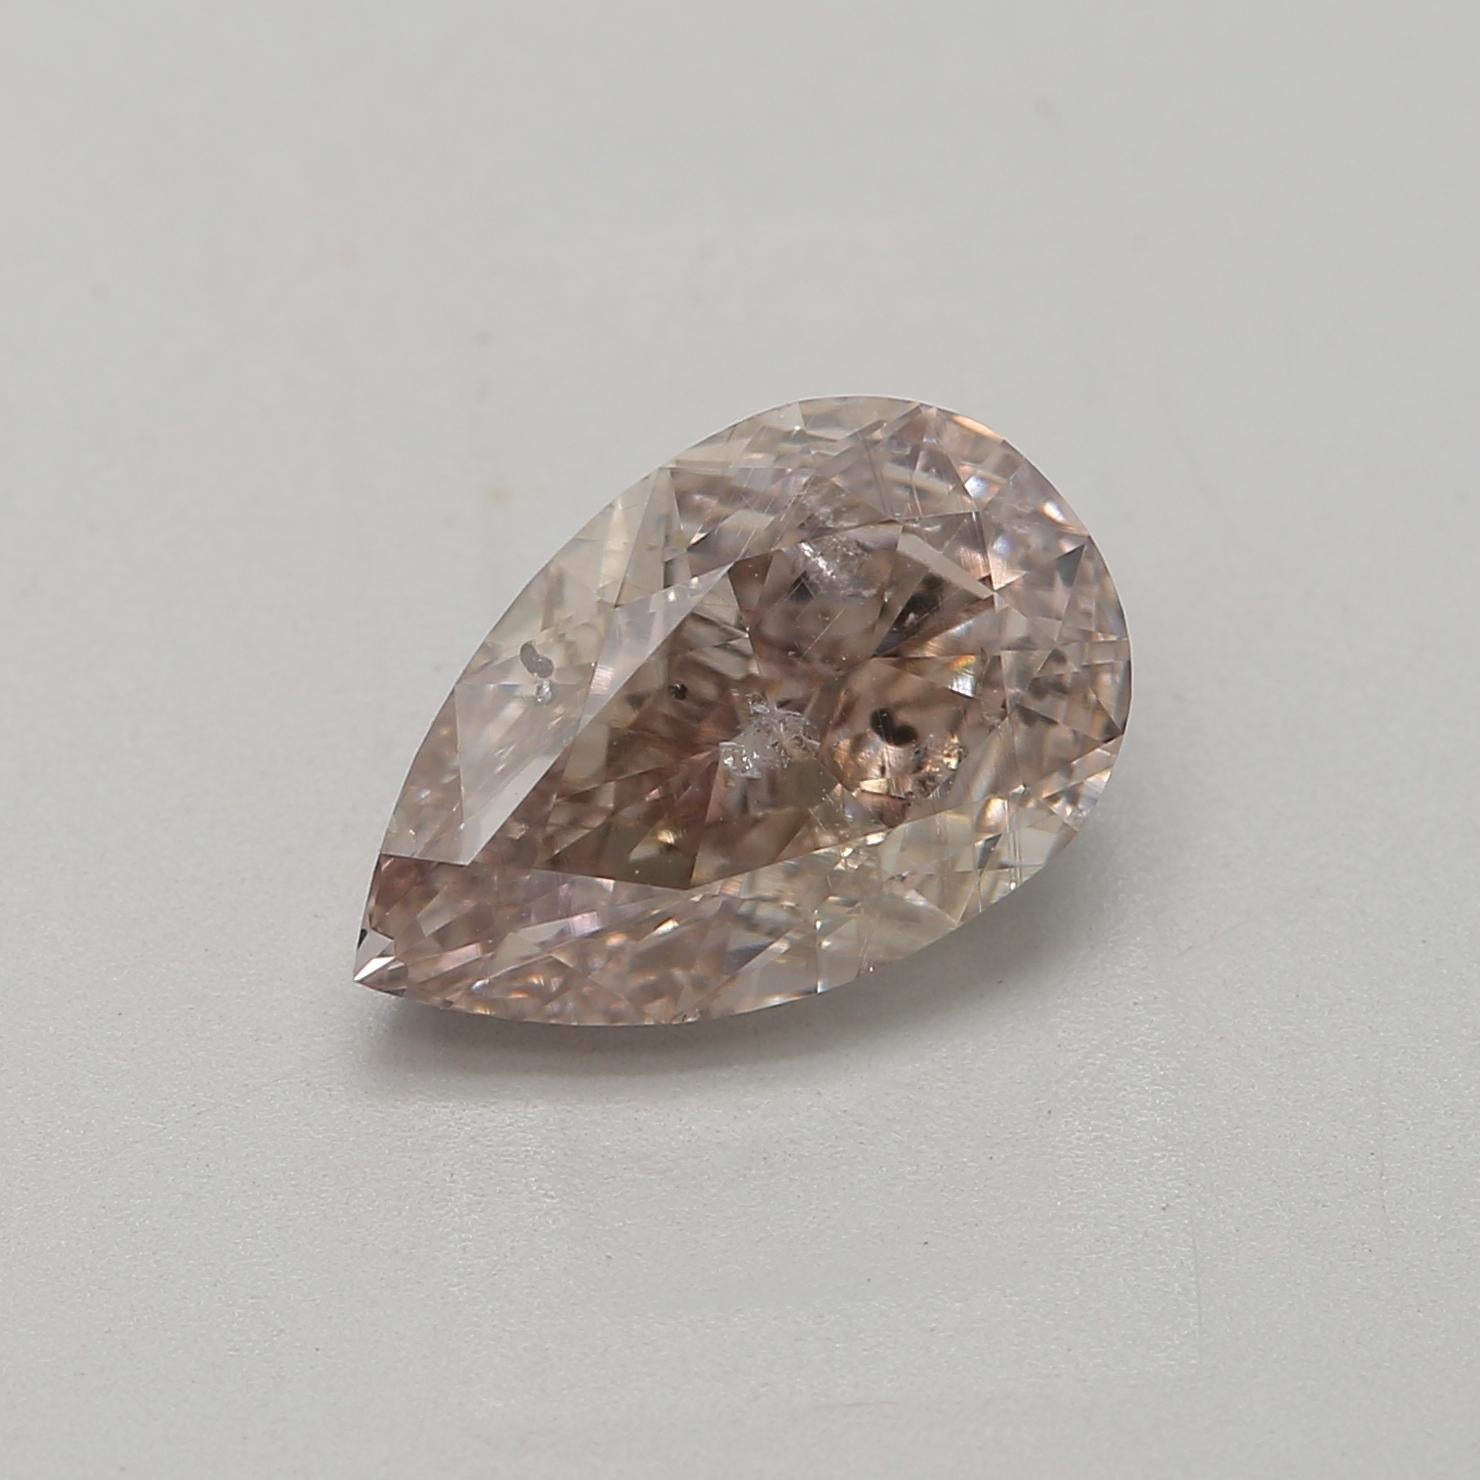 *100% NATURAL FANCY COLOUR DIAMOND*

✪ Diamond Details ✪

➛ Shape: Pear
➛ Colour Grade: Fancy Pink Brown
➛ Carat: 1.32
➛ Clarity: I1
➛ GIA Certified 

^FEATURES OF THE DIAMOND^

This 1.32-carat diamond has a round brilliant cut with 57 or 58 facets,